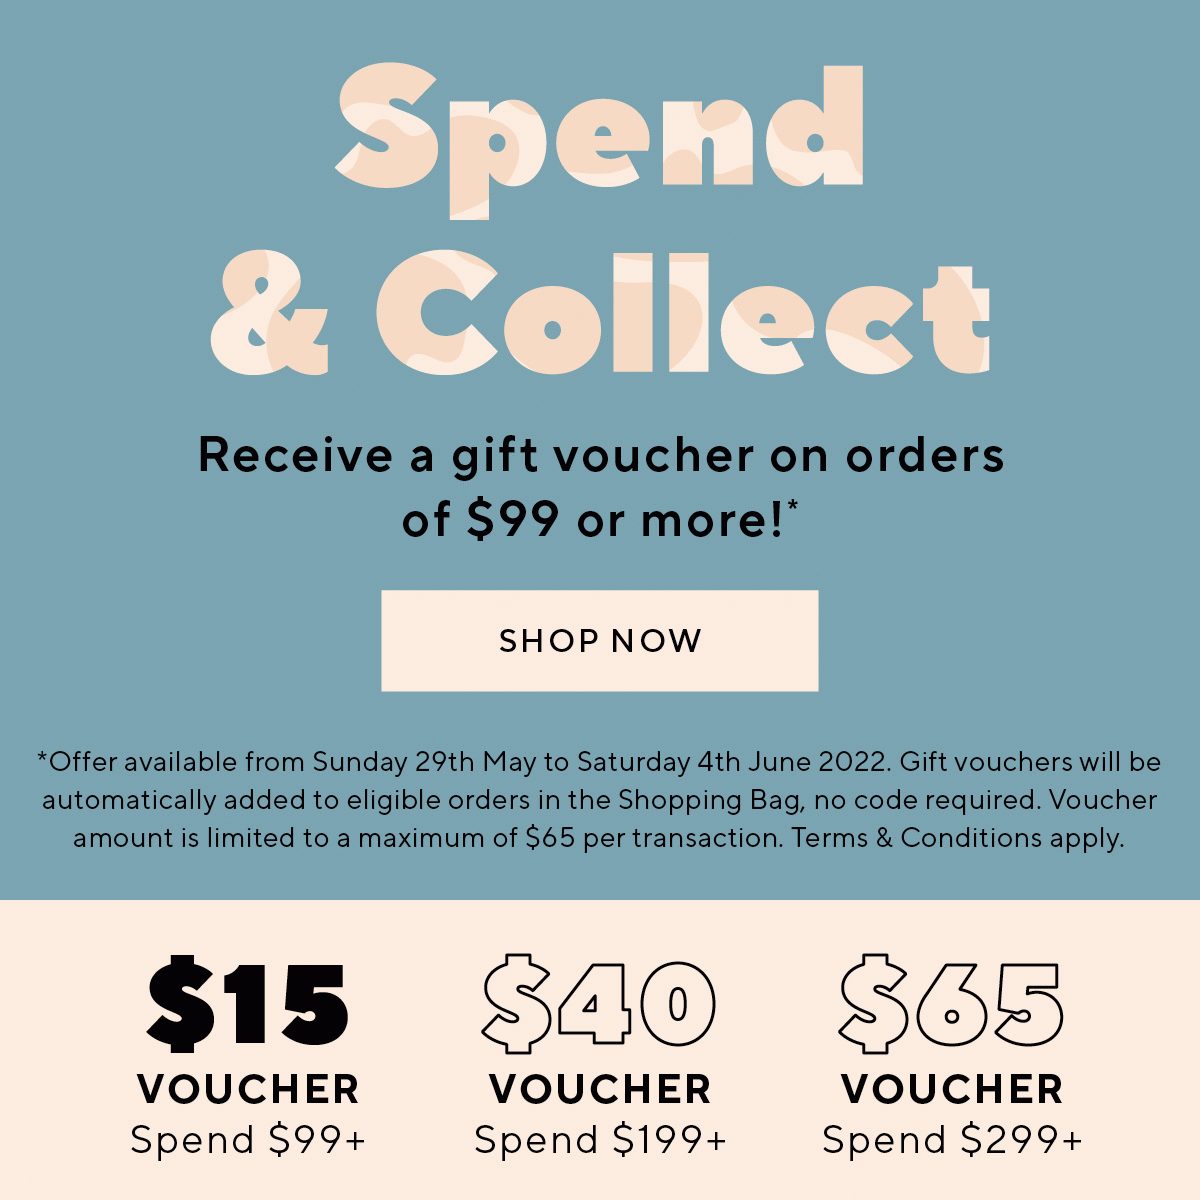 Receive a gift voucher on orders of $99 or more!*